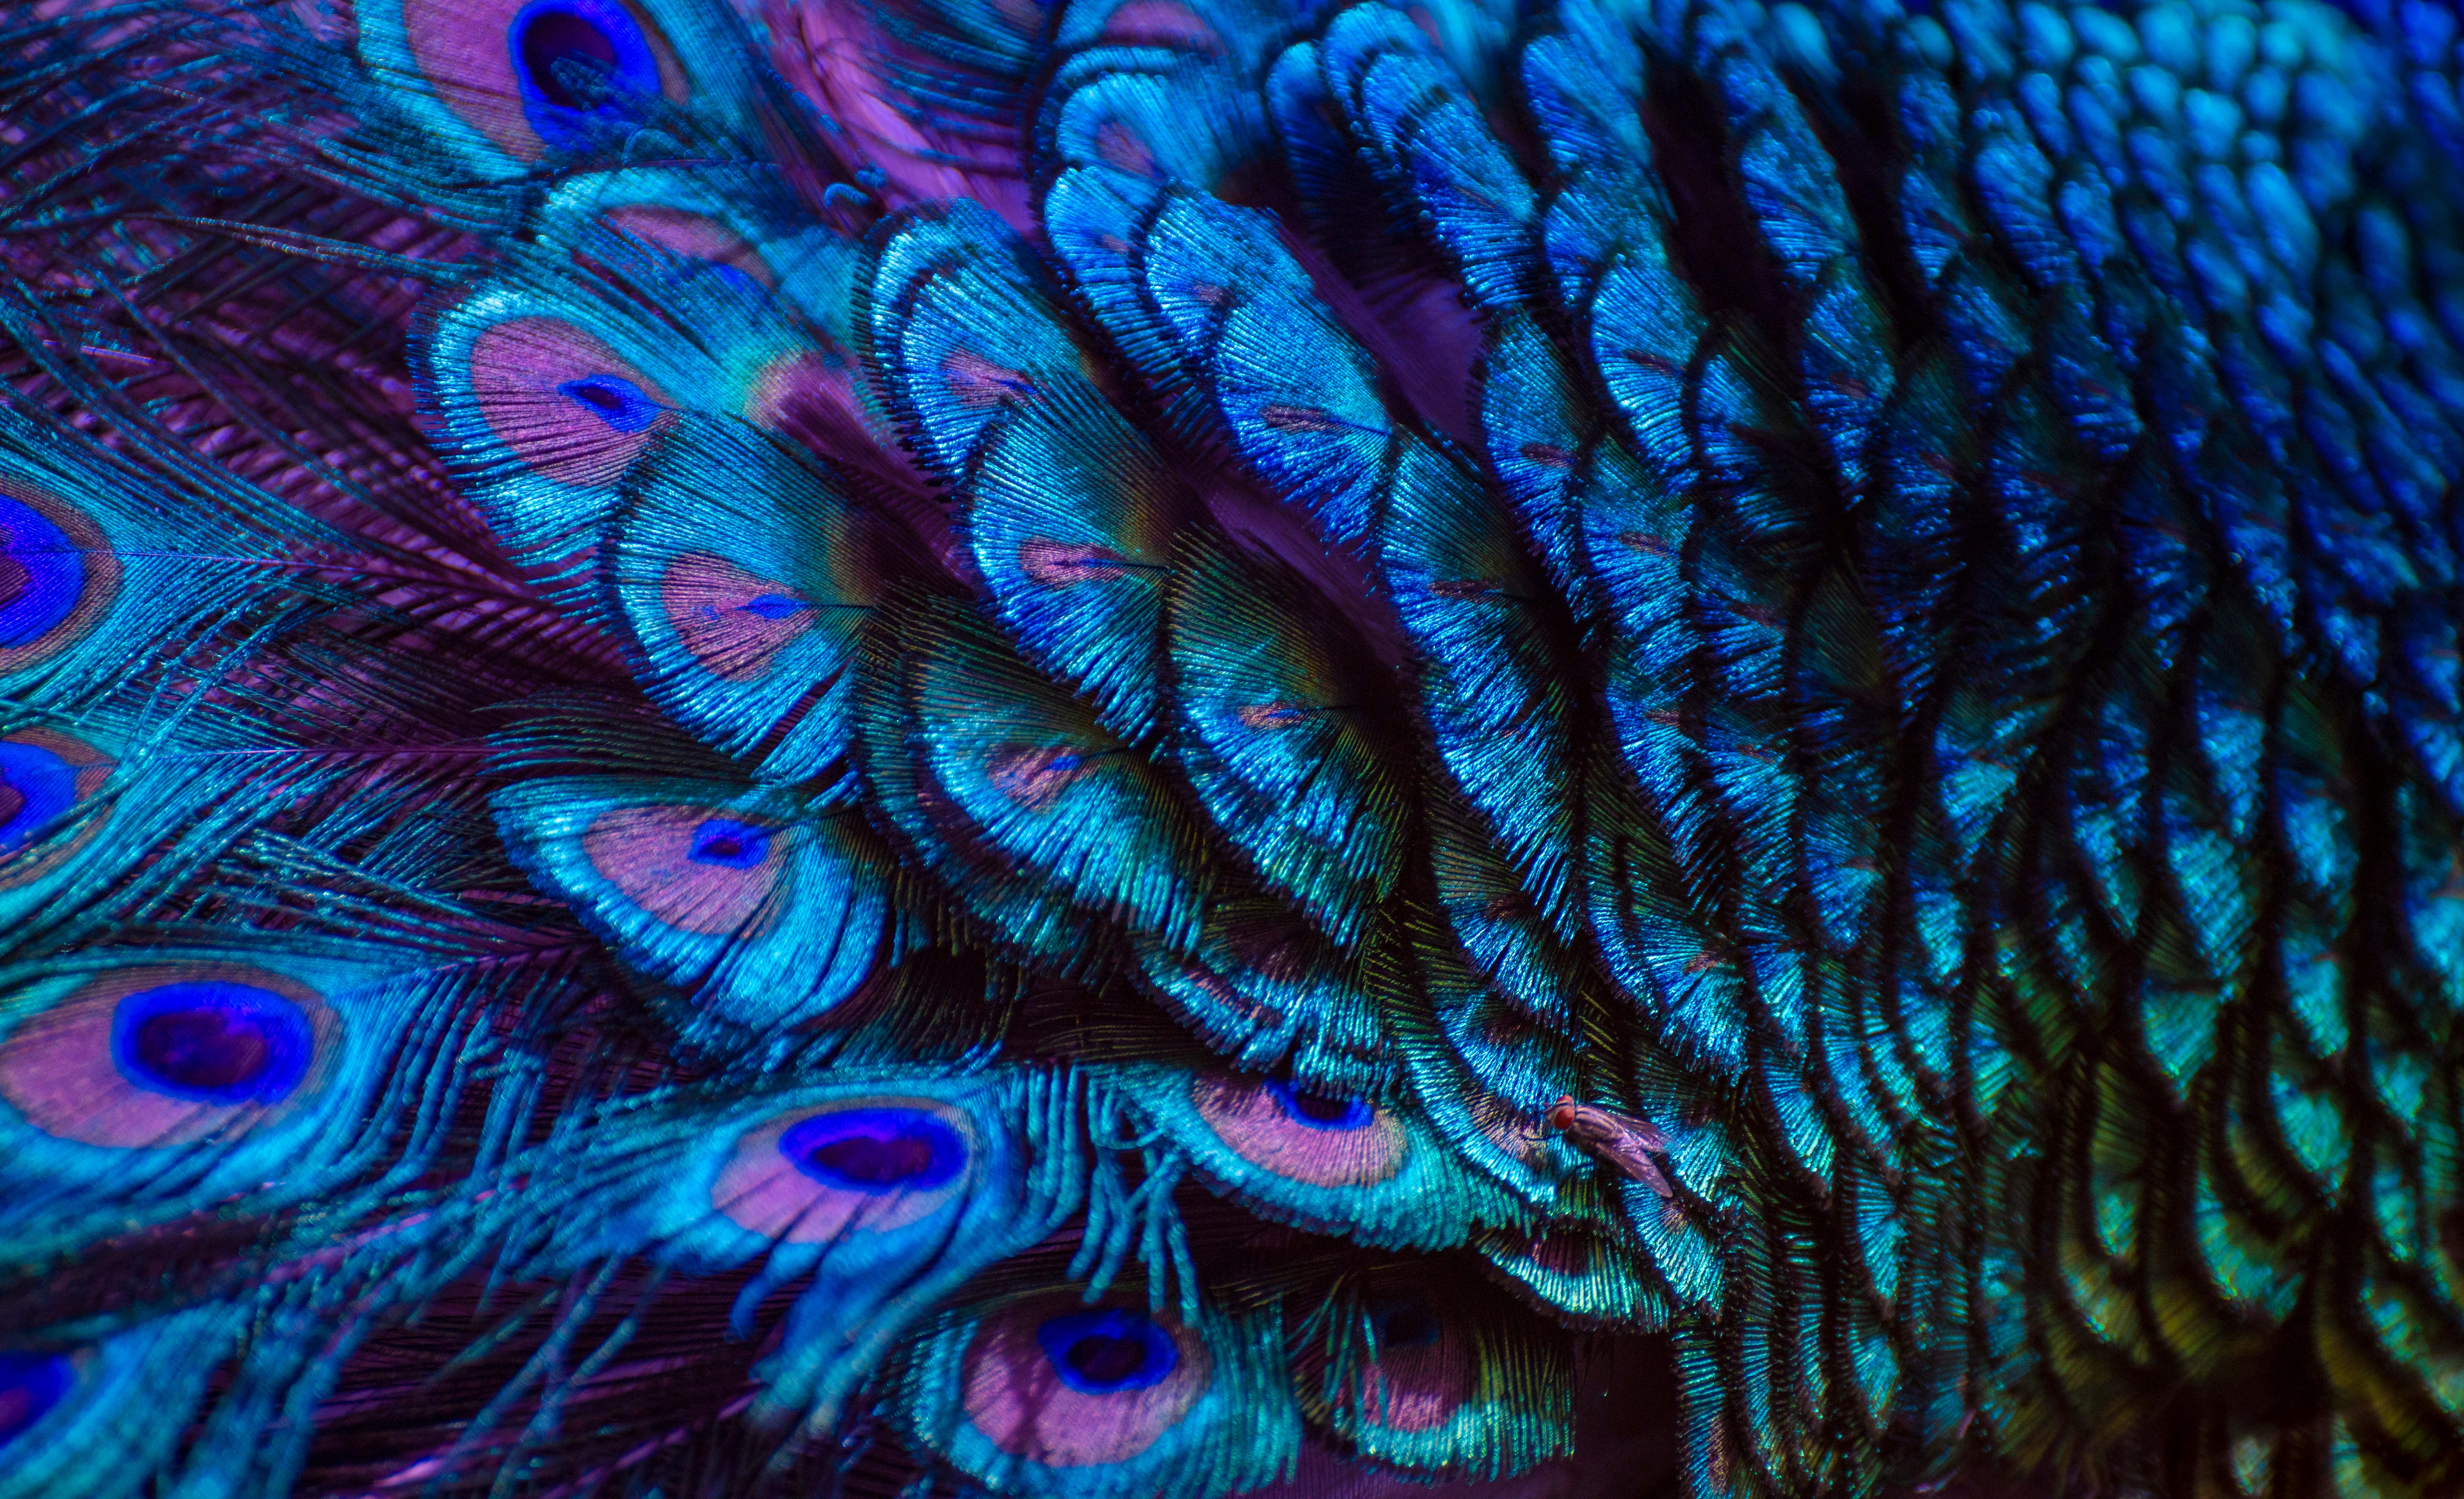 Peacock Feather Photos Download The BEST Free Peacock Feather Stock Photos   HD Images